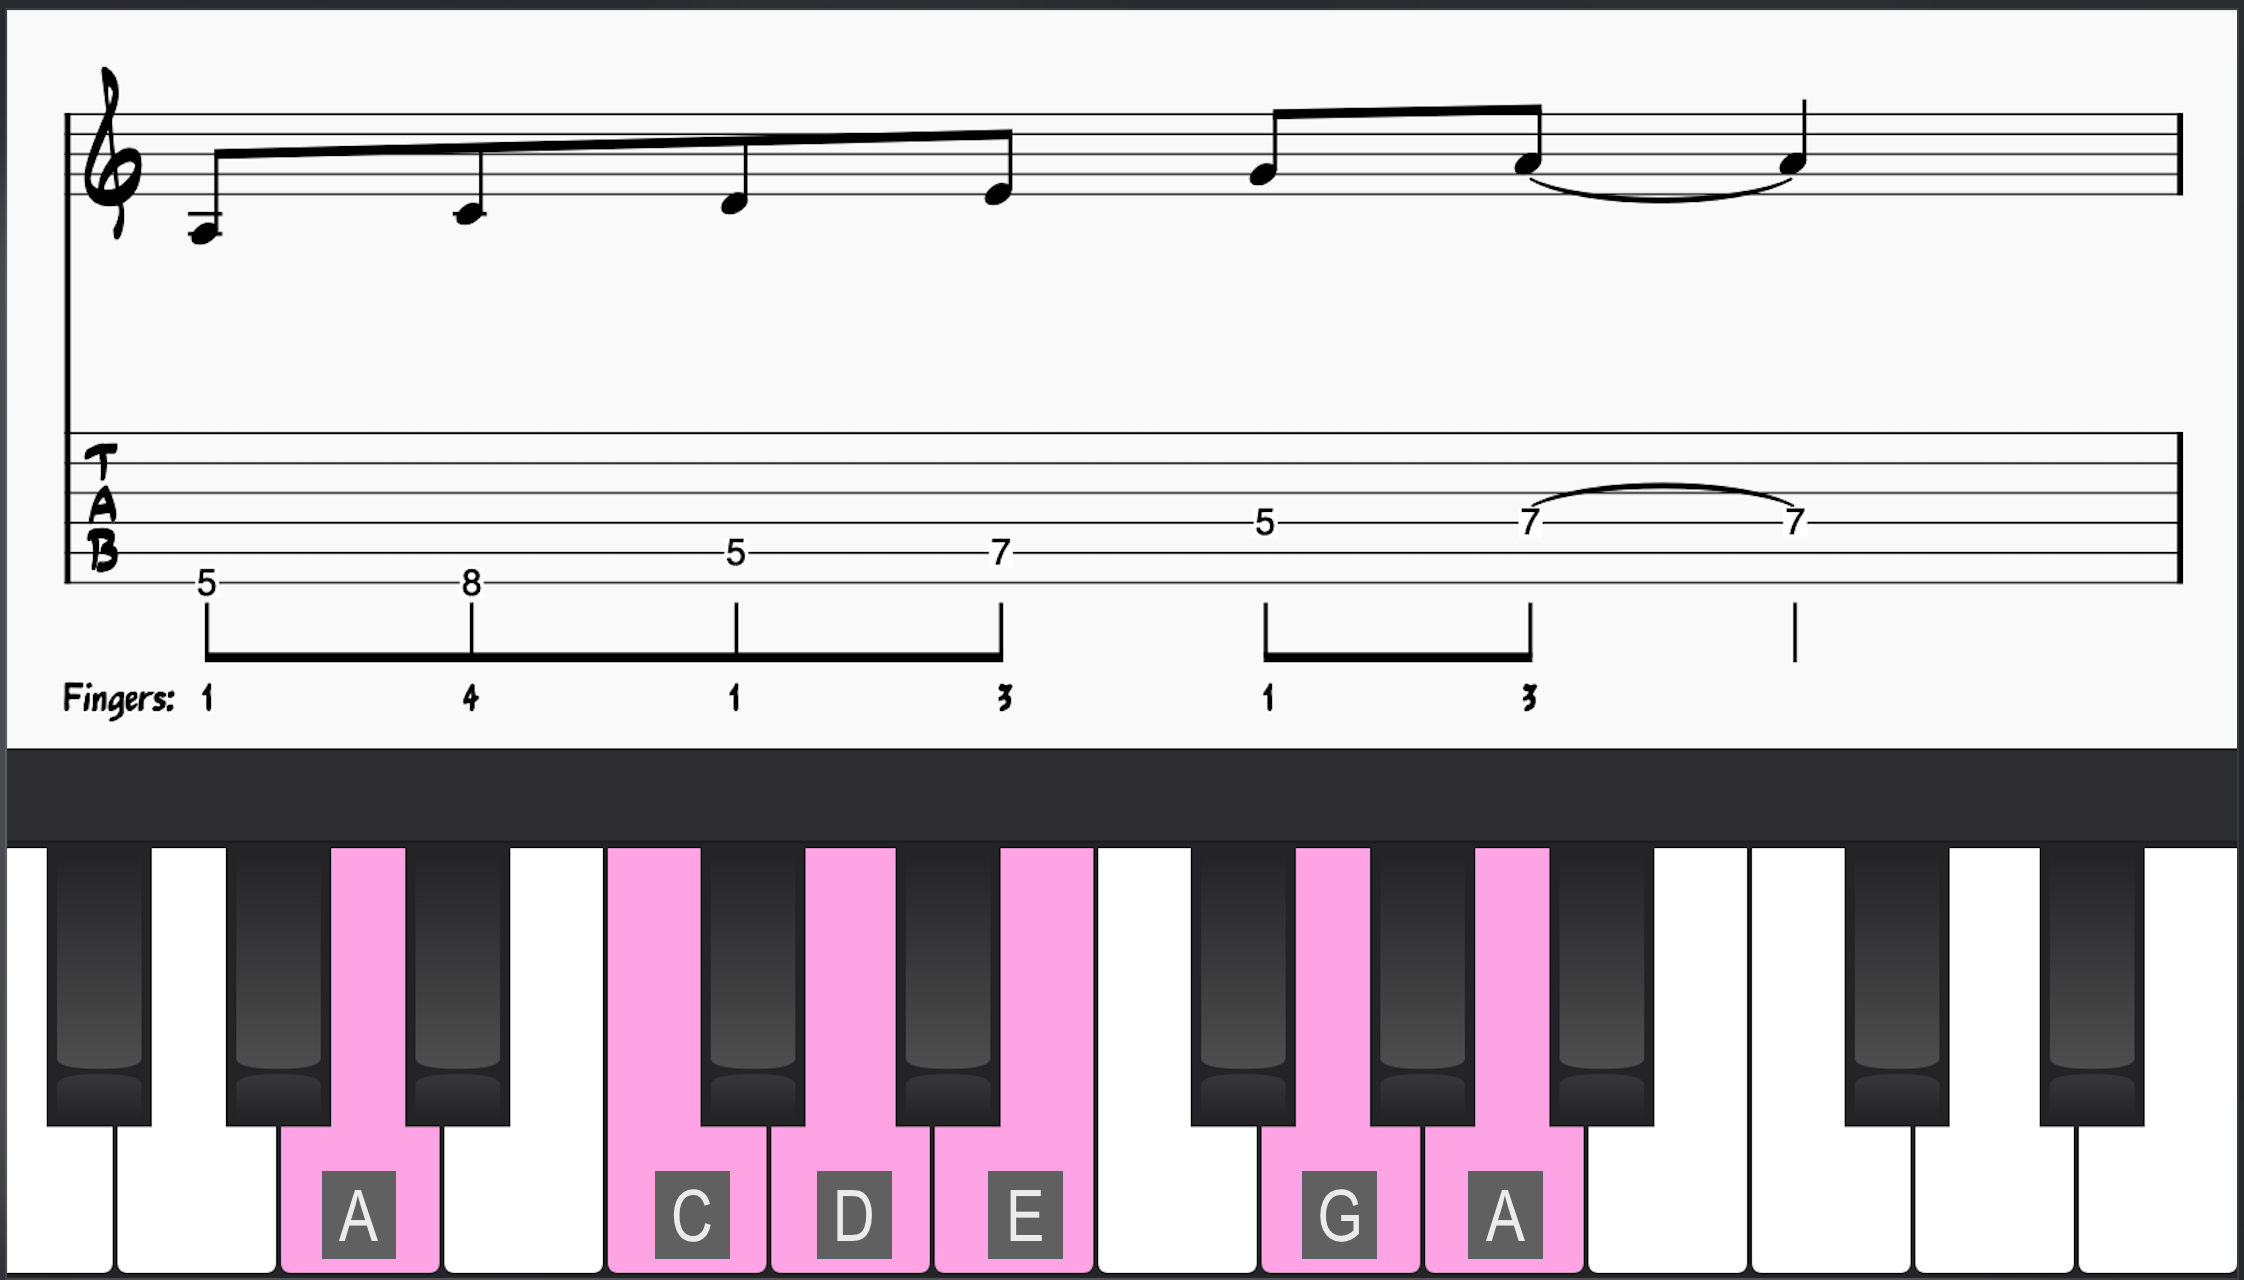 A minor pentatonic scale on piano and guitar